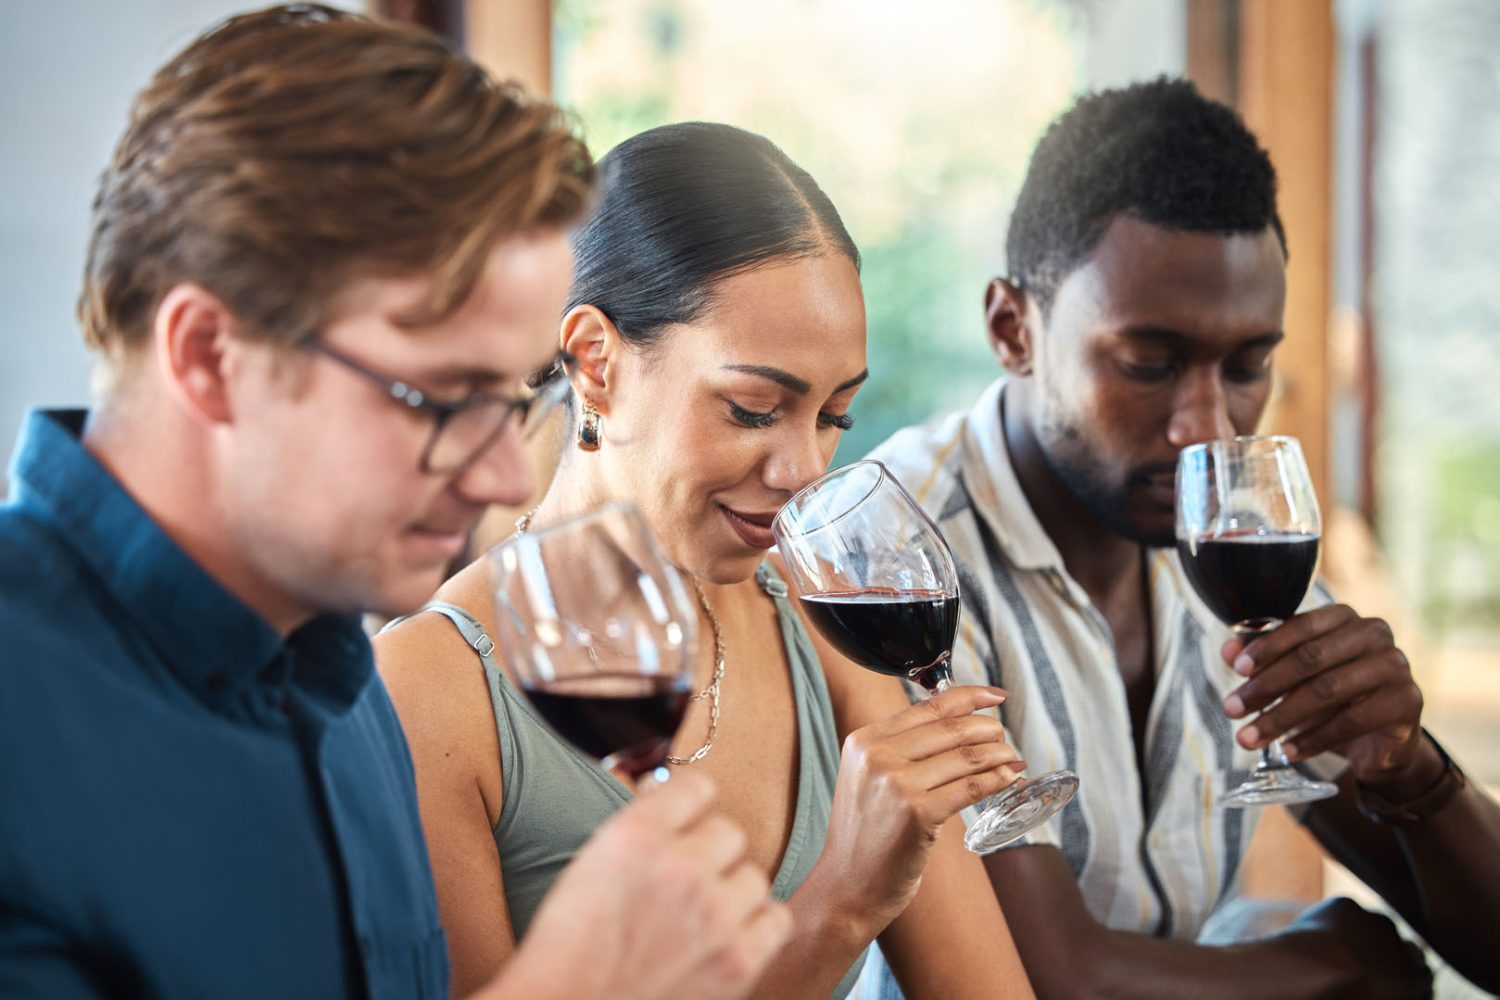 Diversity, luxury and friends wine tasting at a restaurant or vineyard, smelling alcohol in a glass together. Young carefree people bonding and having fun, enjoying a wine tour at a distillery.